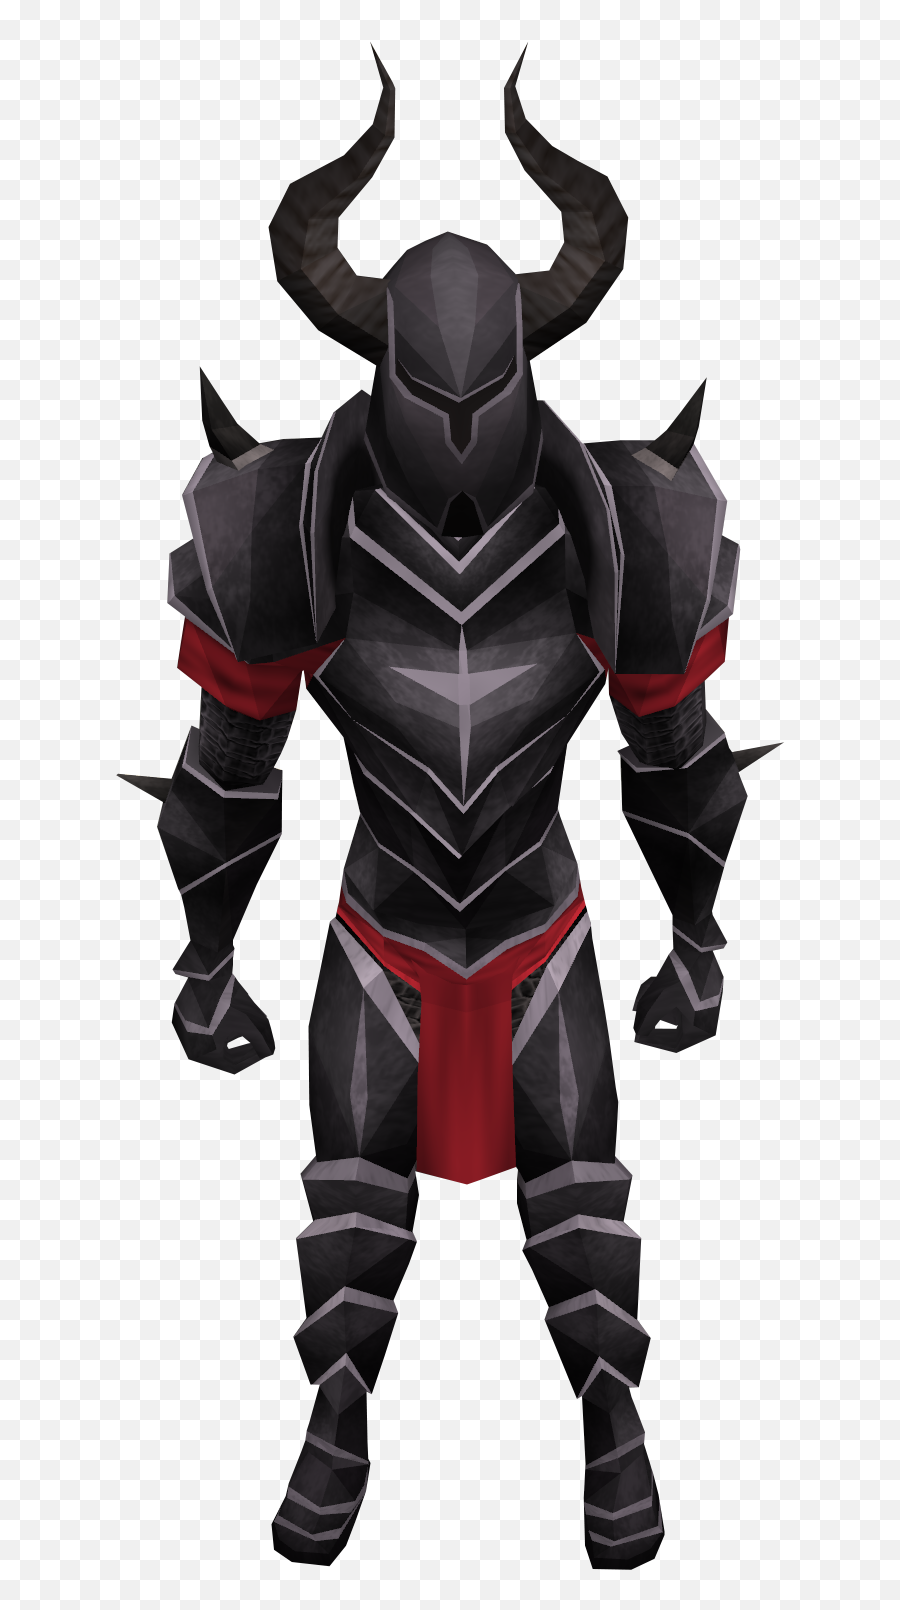 Download Free Png Black Knight Runescape Black Knight Armor Black Knight Png Free Transparent Png Images Pngaaa Com - black knight armor roblox